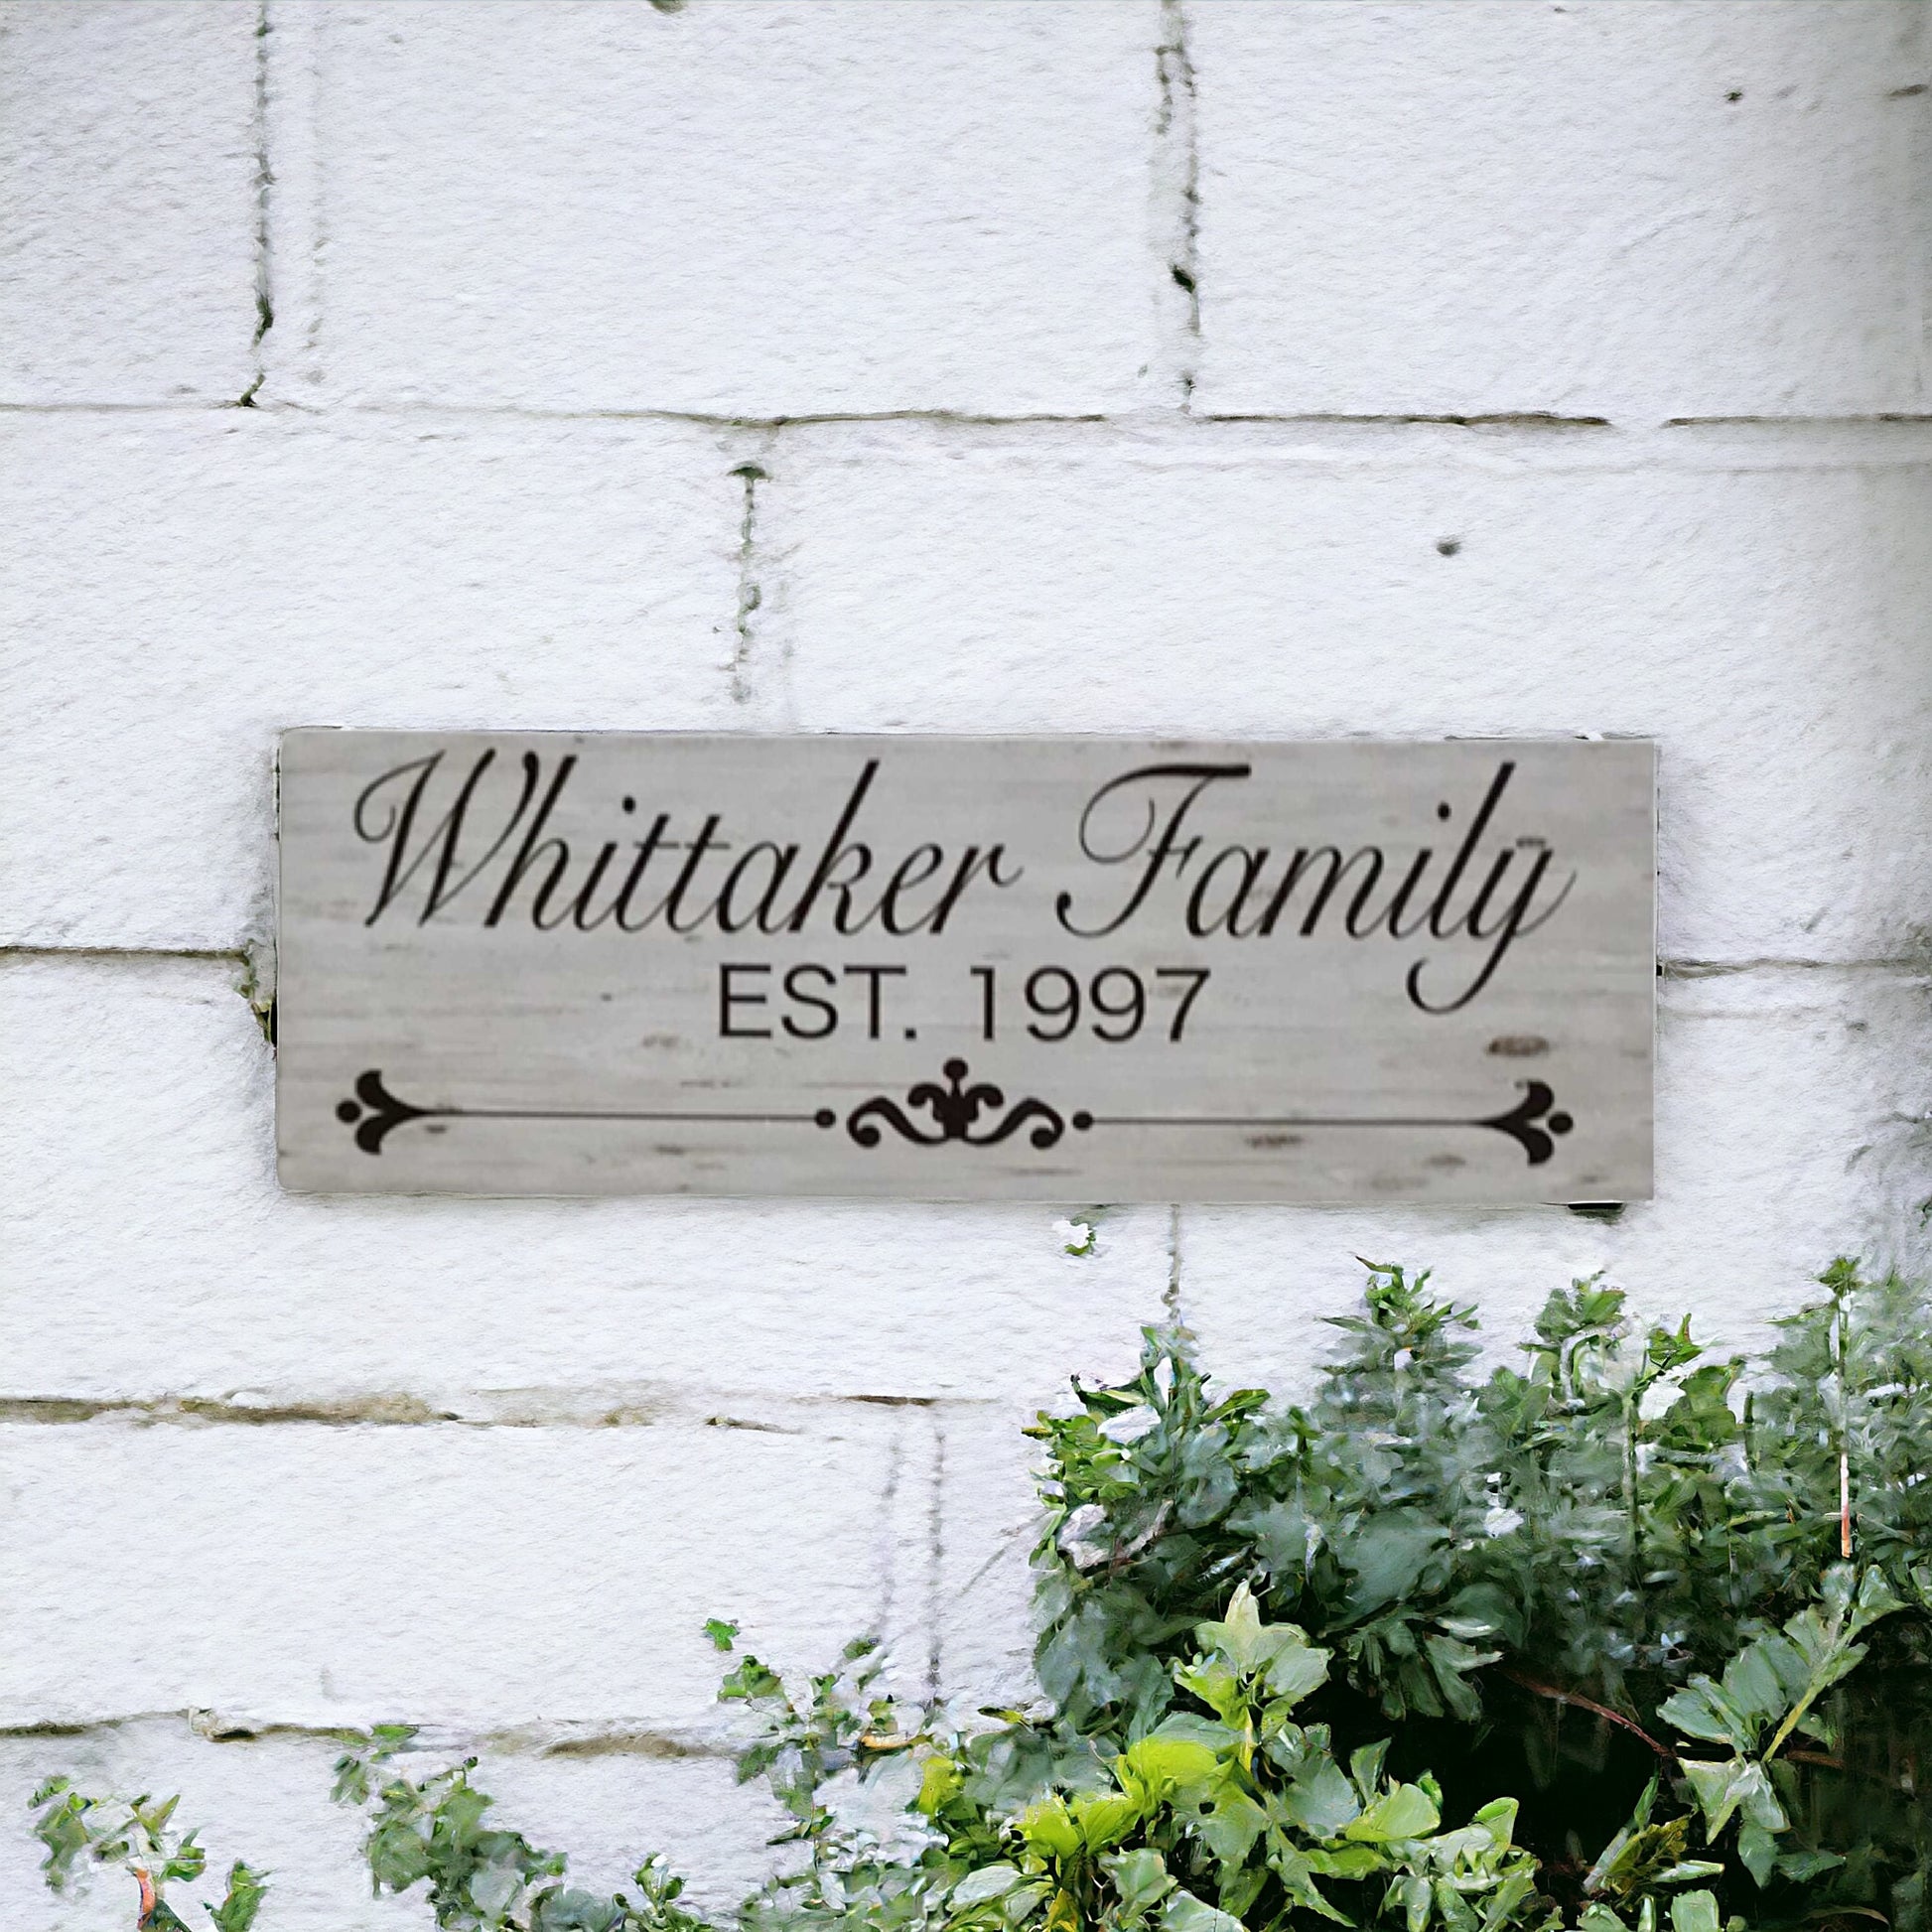 Family Name Custom Personalised Vintage Sign - The Renmy Store Homewares & Gifts 